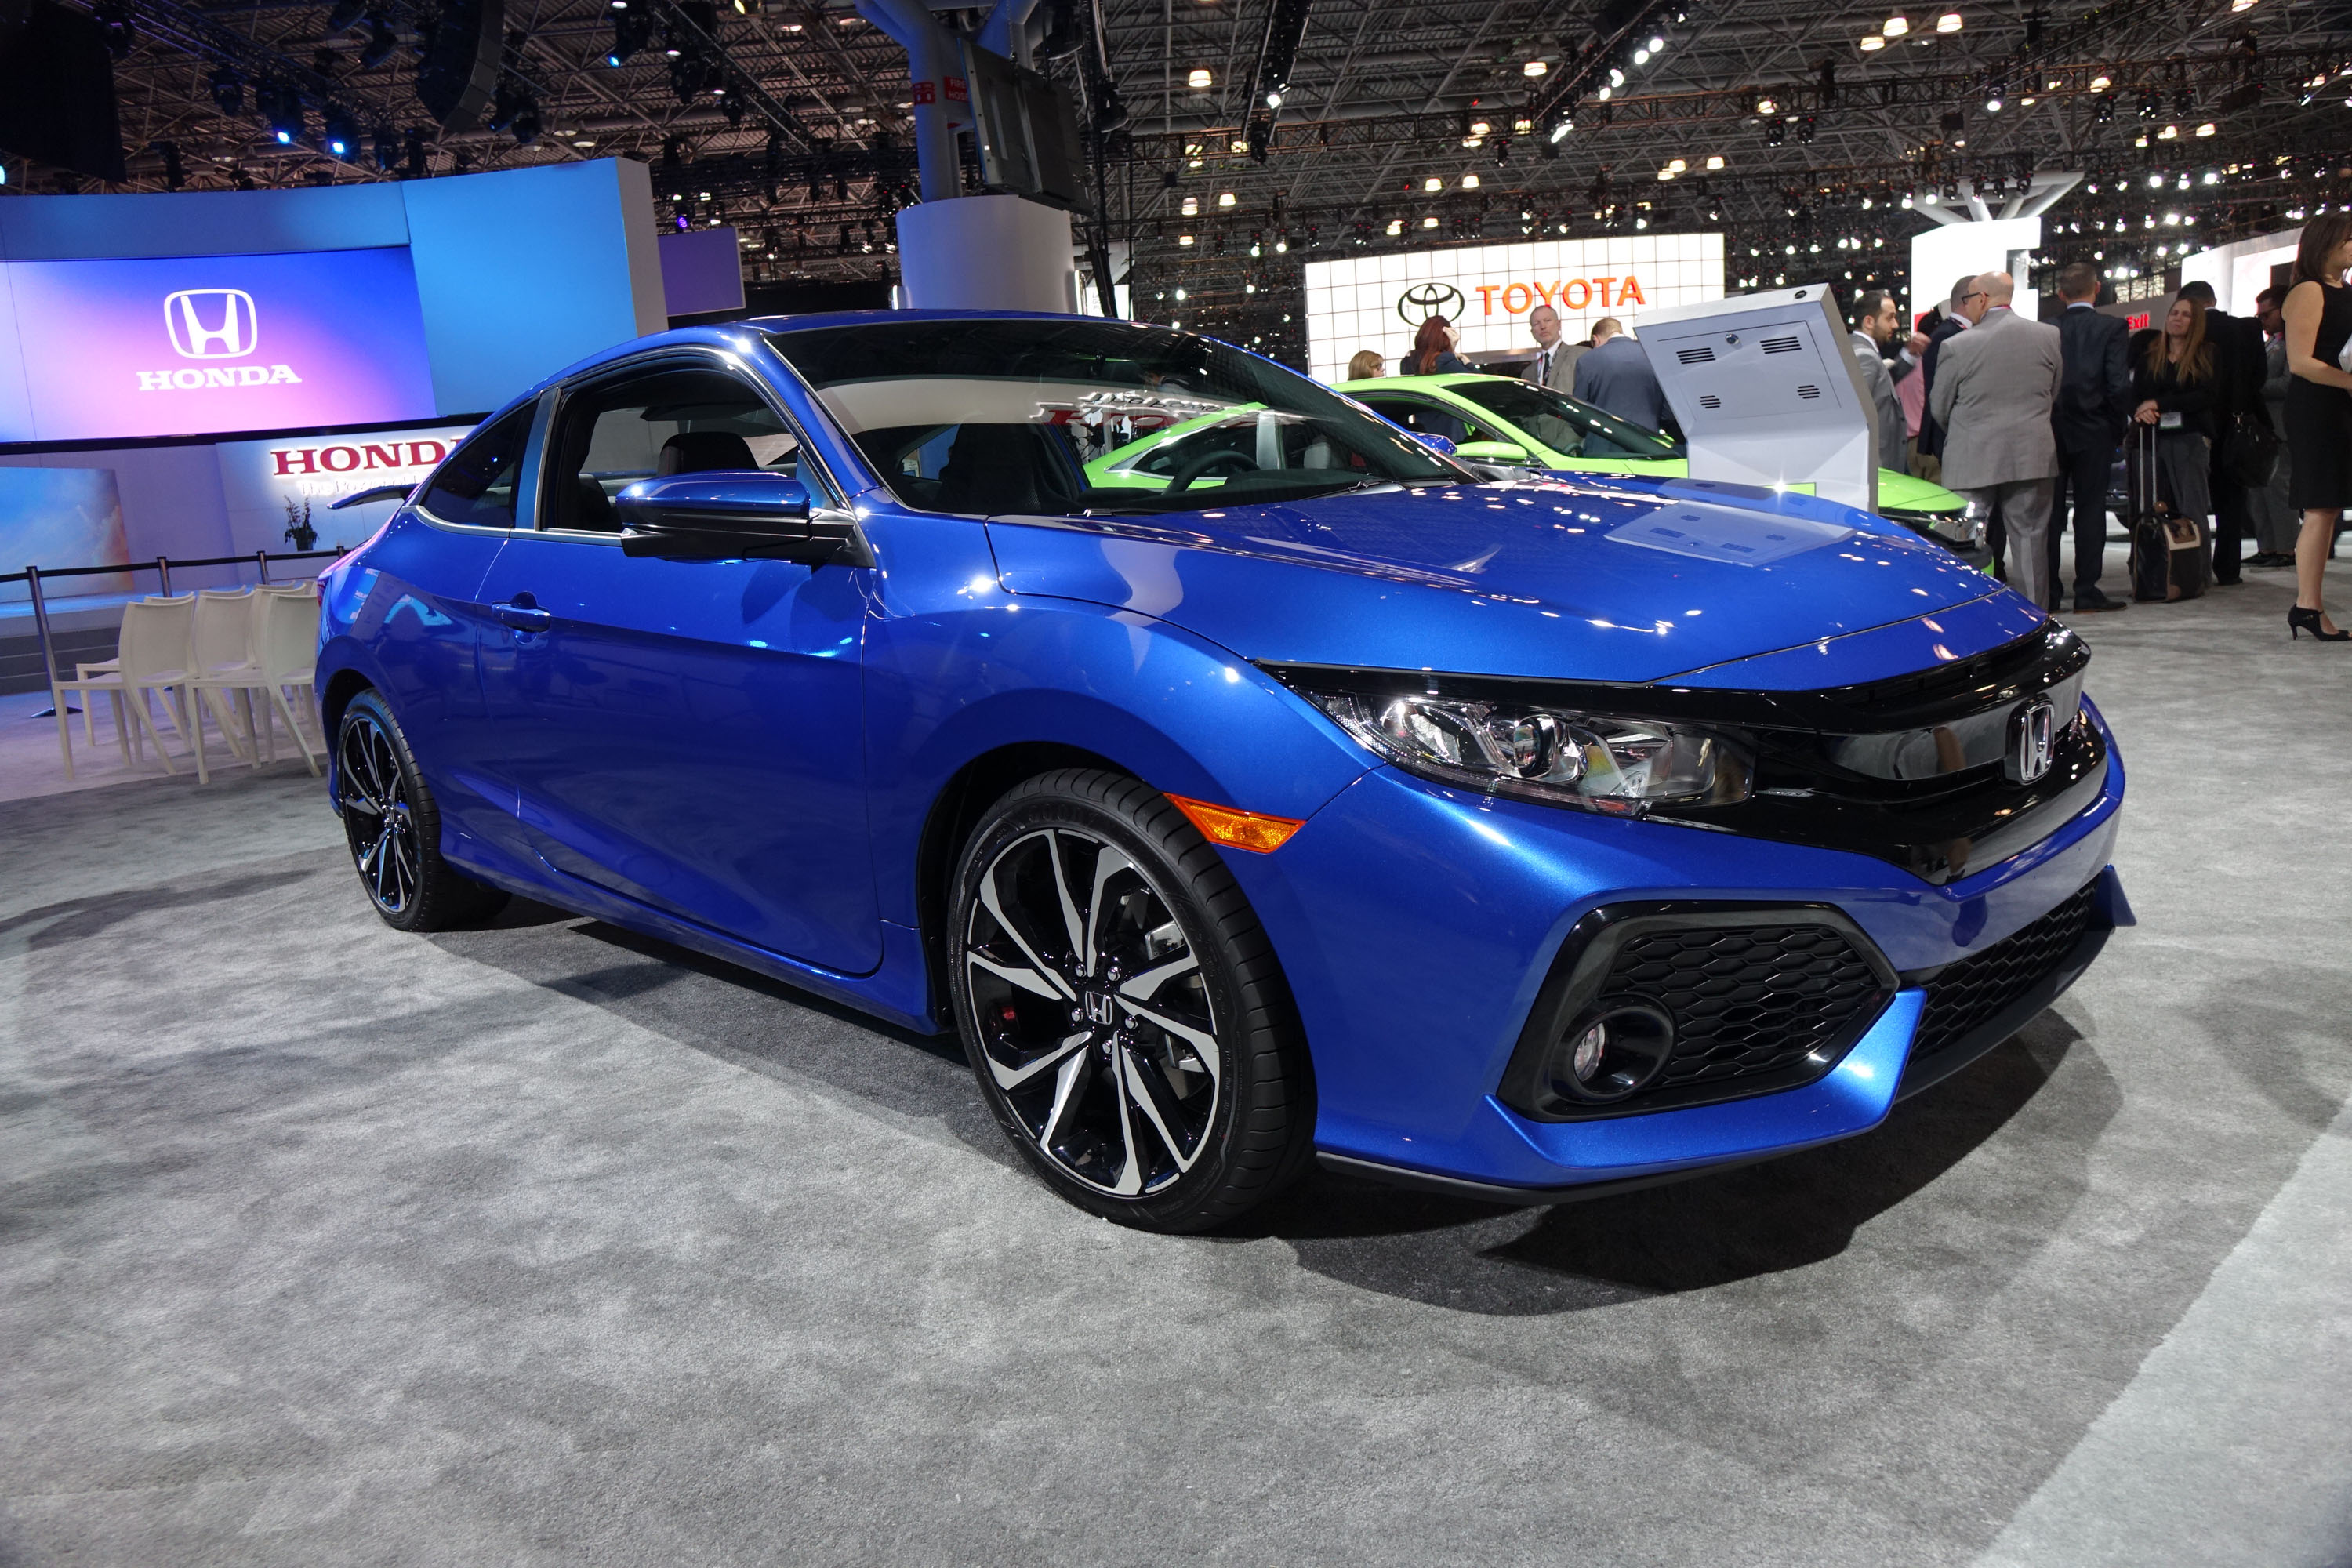 2017 Honda Civic Si And Civic Si Coupe Revealed With 205 Horsepower